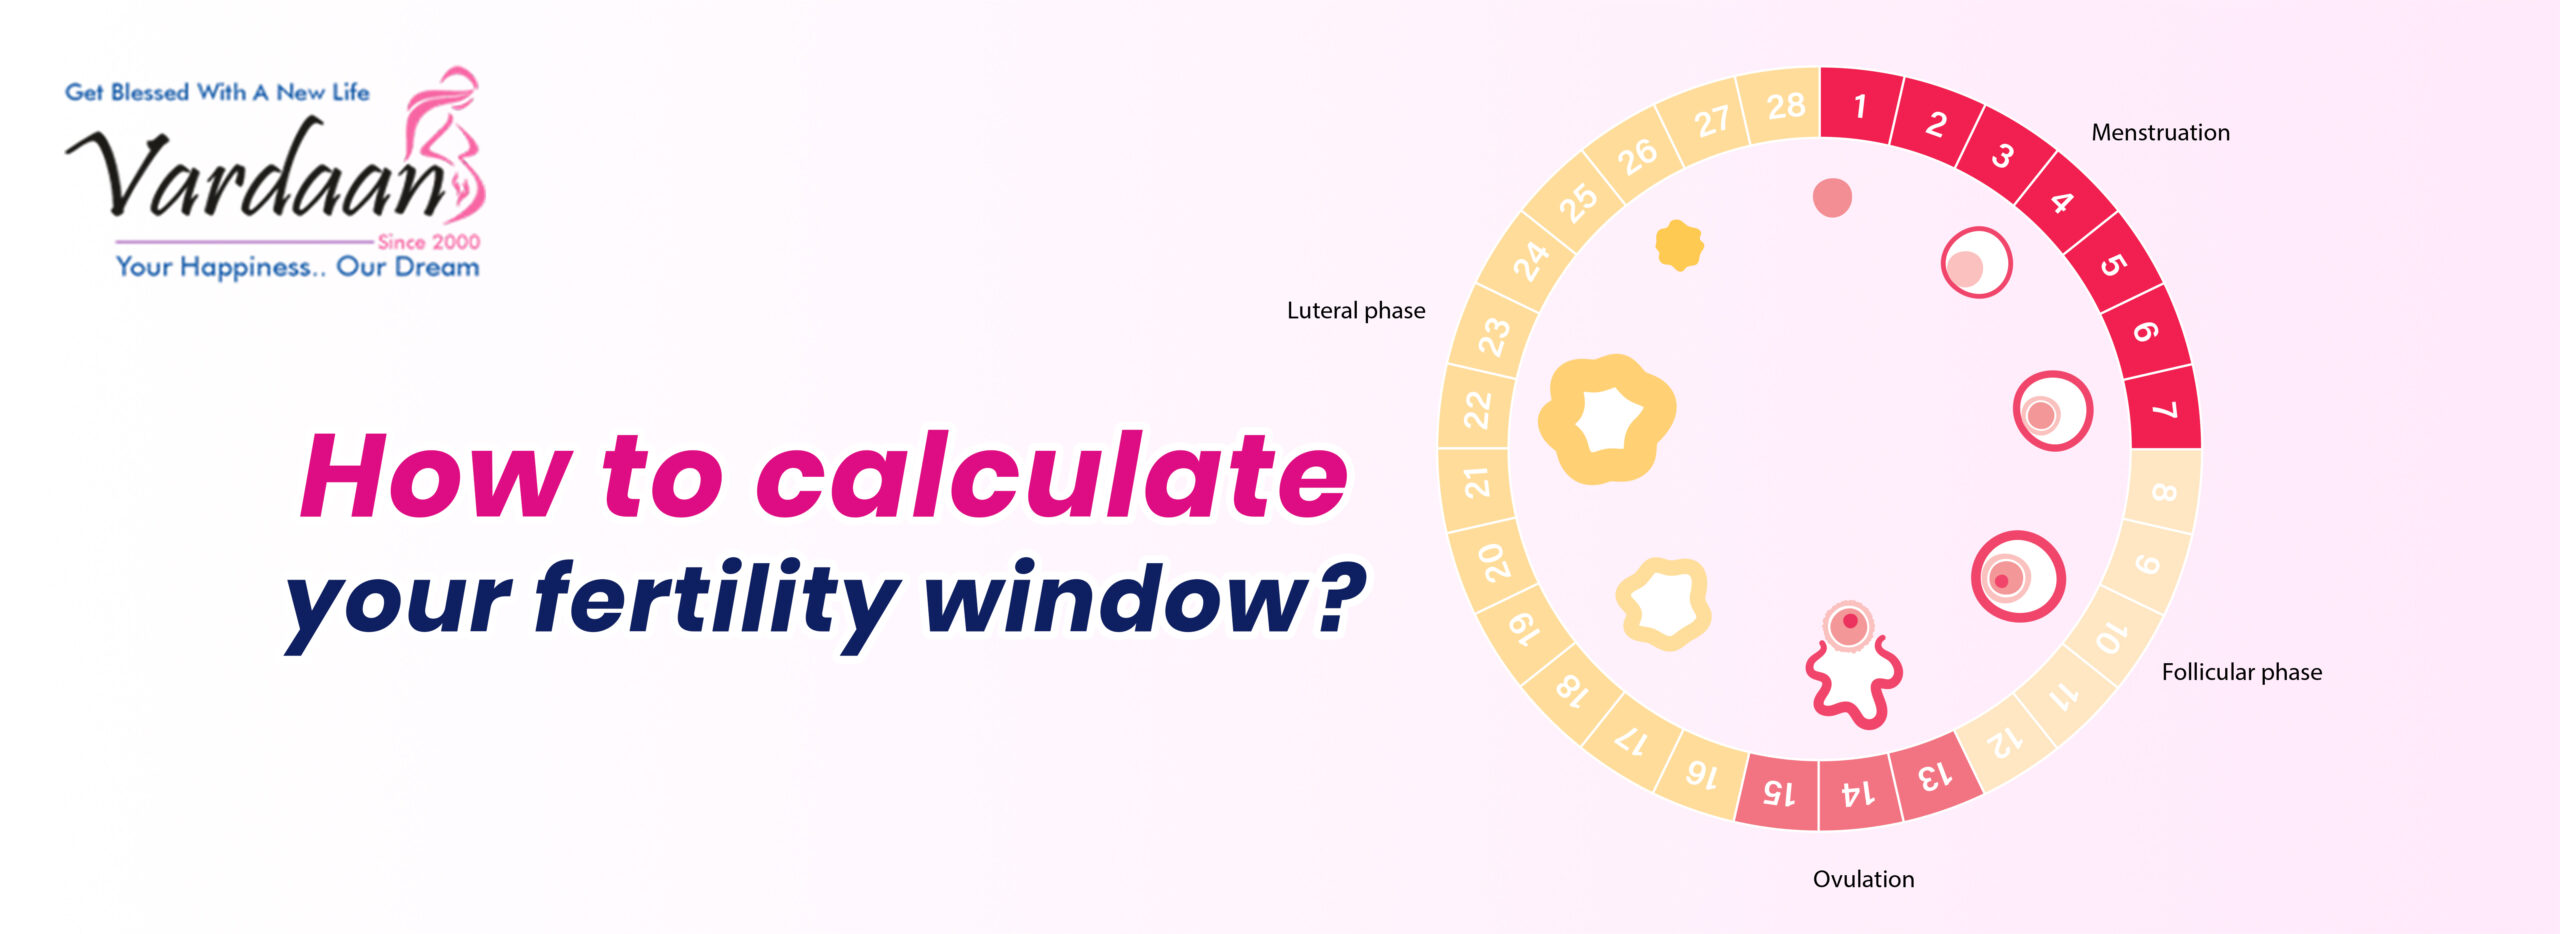 How to calculate your fertility window